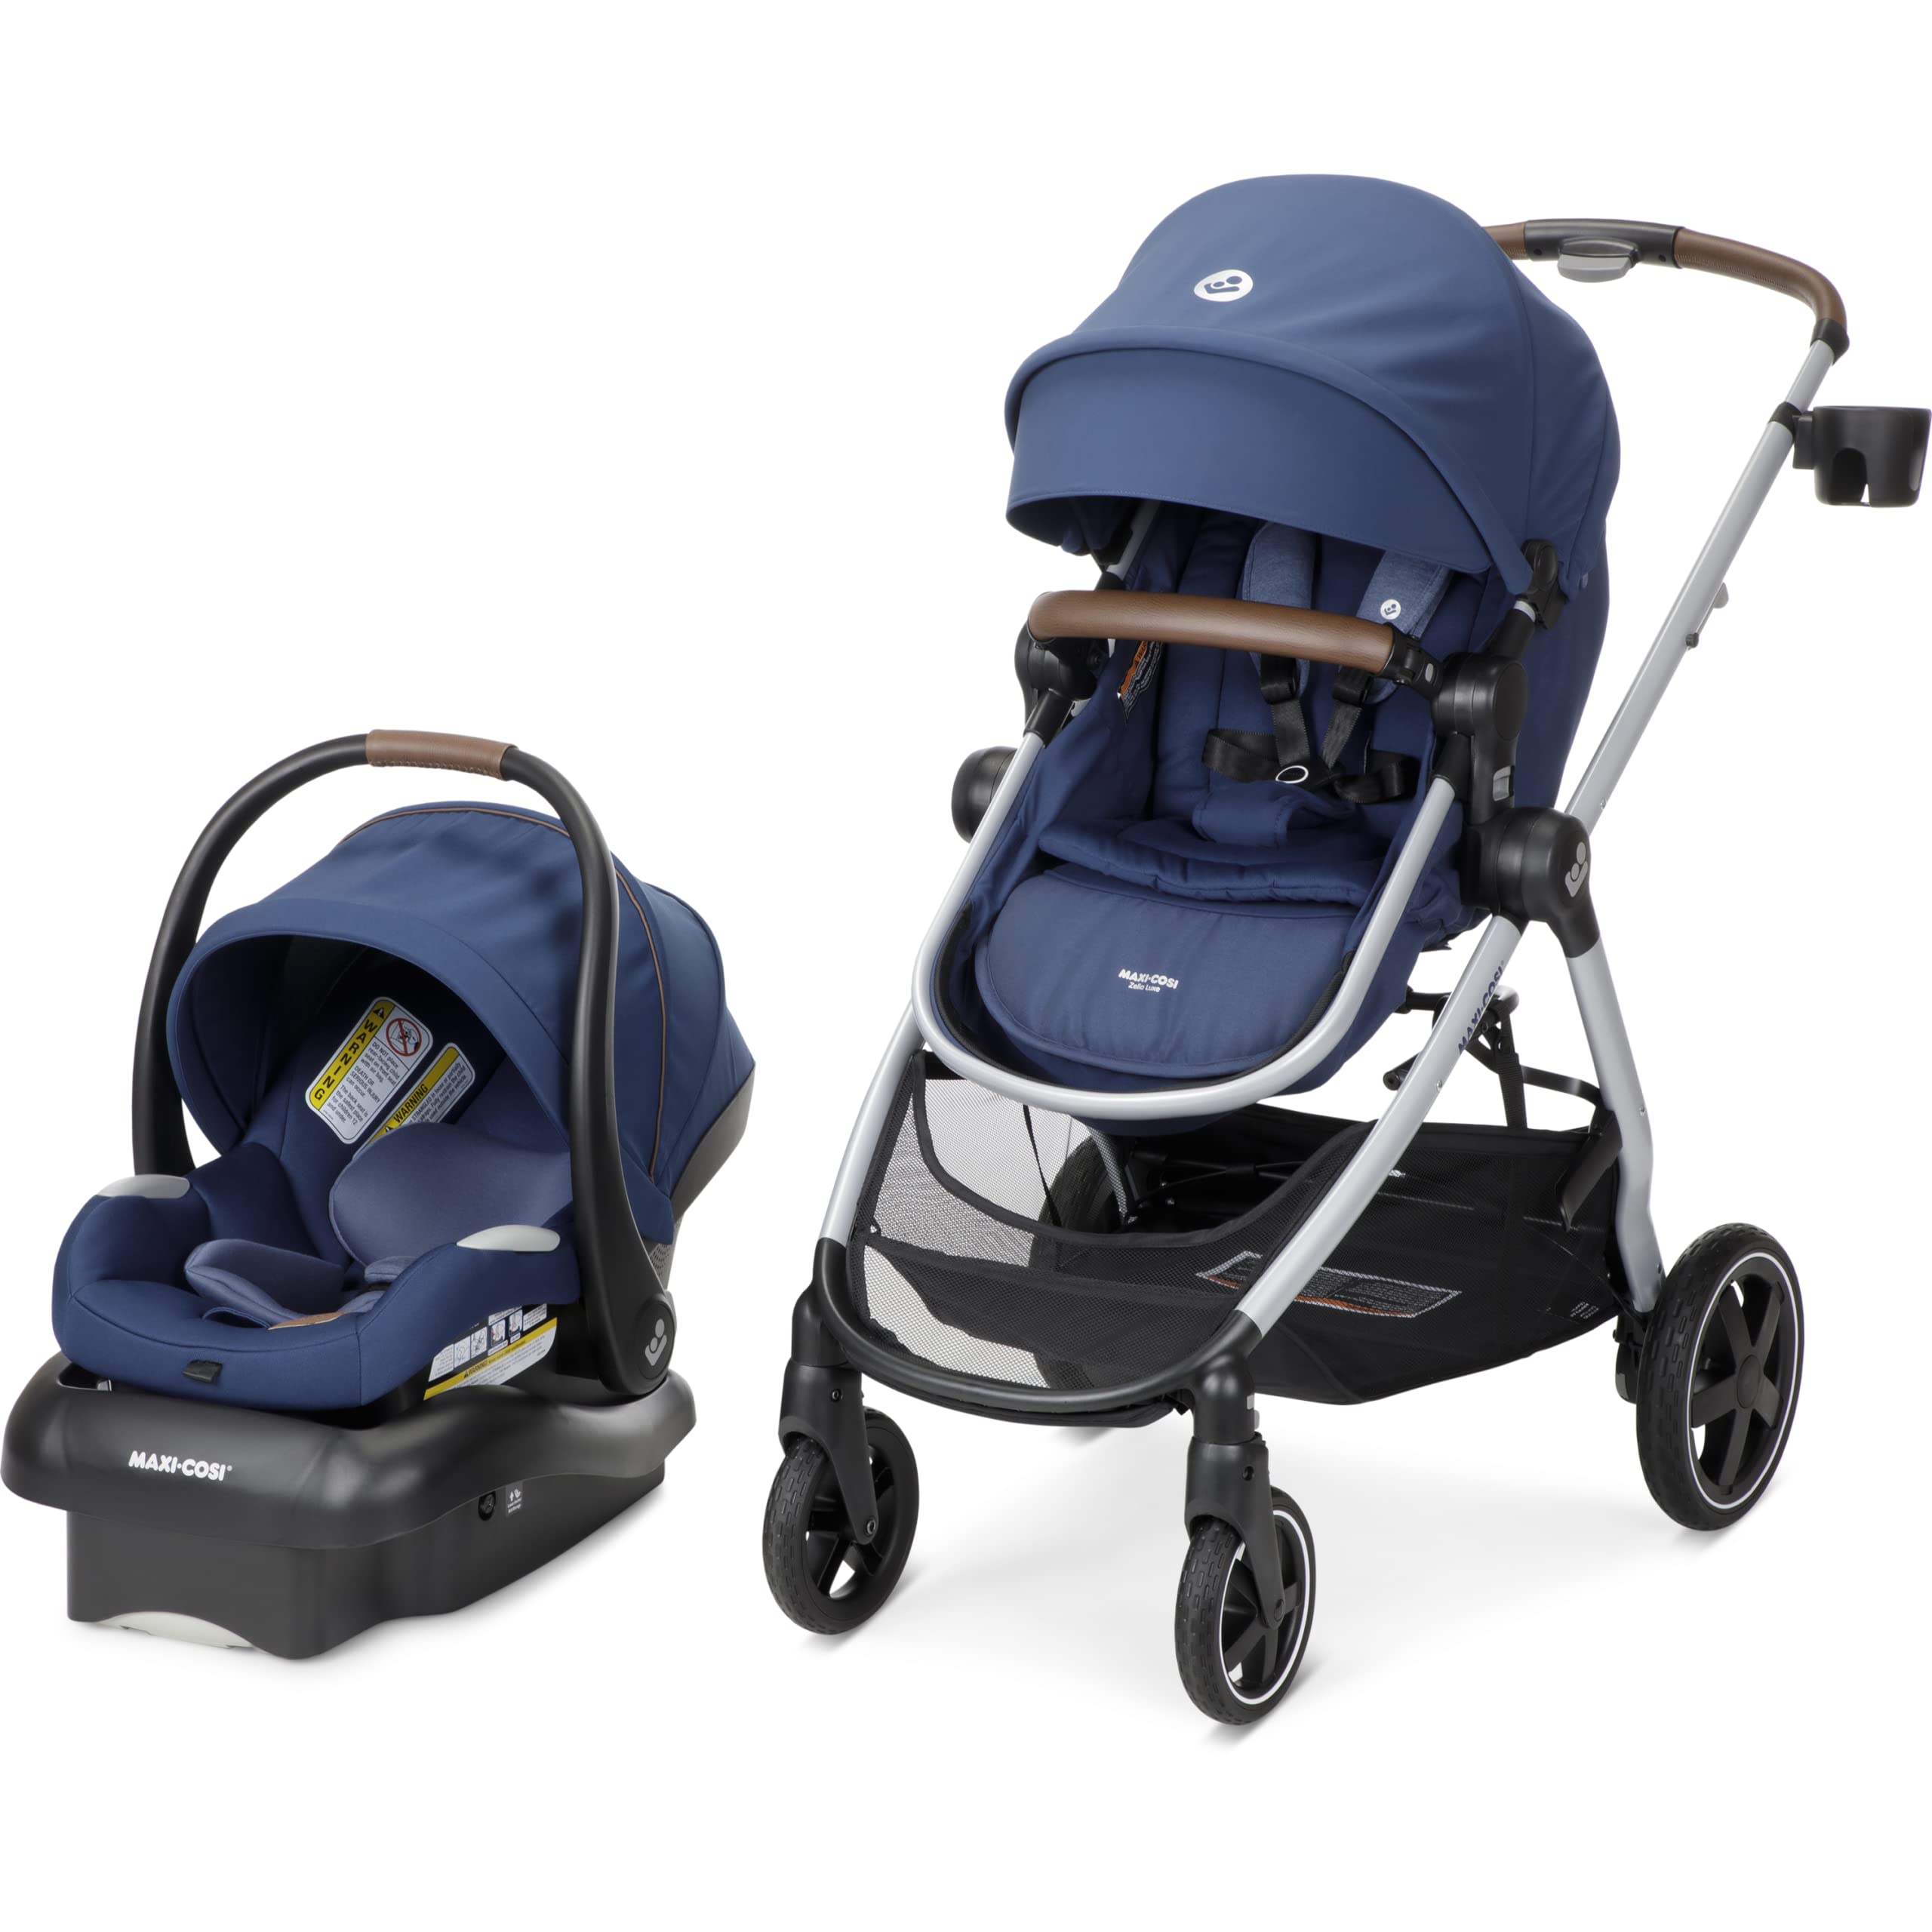 Maxi-Cosi Zelia² Luxe 5-in-1 Modular Travel System, Choose Between 5 Modes of use: Parent-Facing car seat Caddy, Reversible Carriage, and Reversible Stroller, New Hope Navy